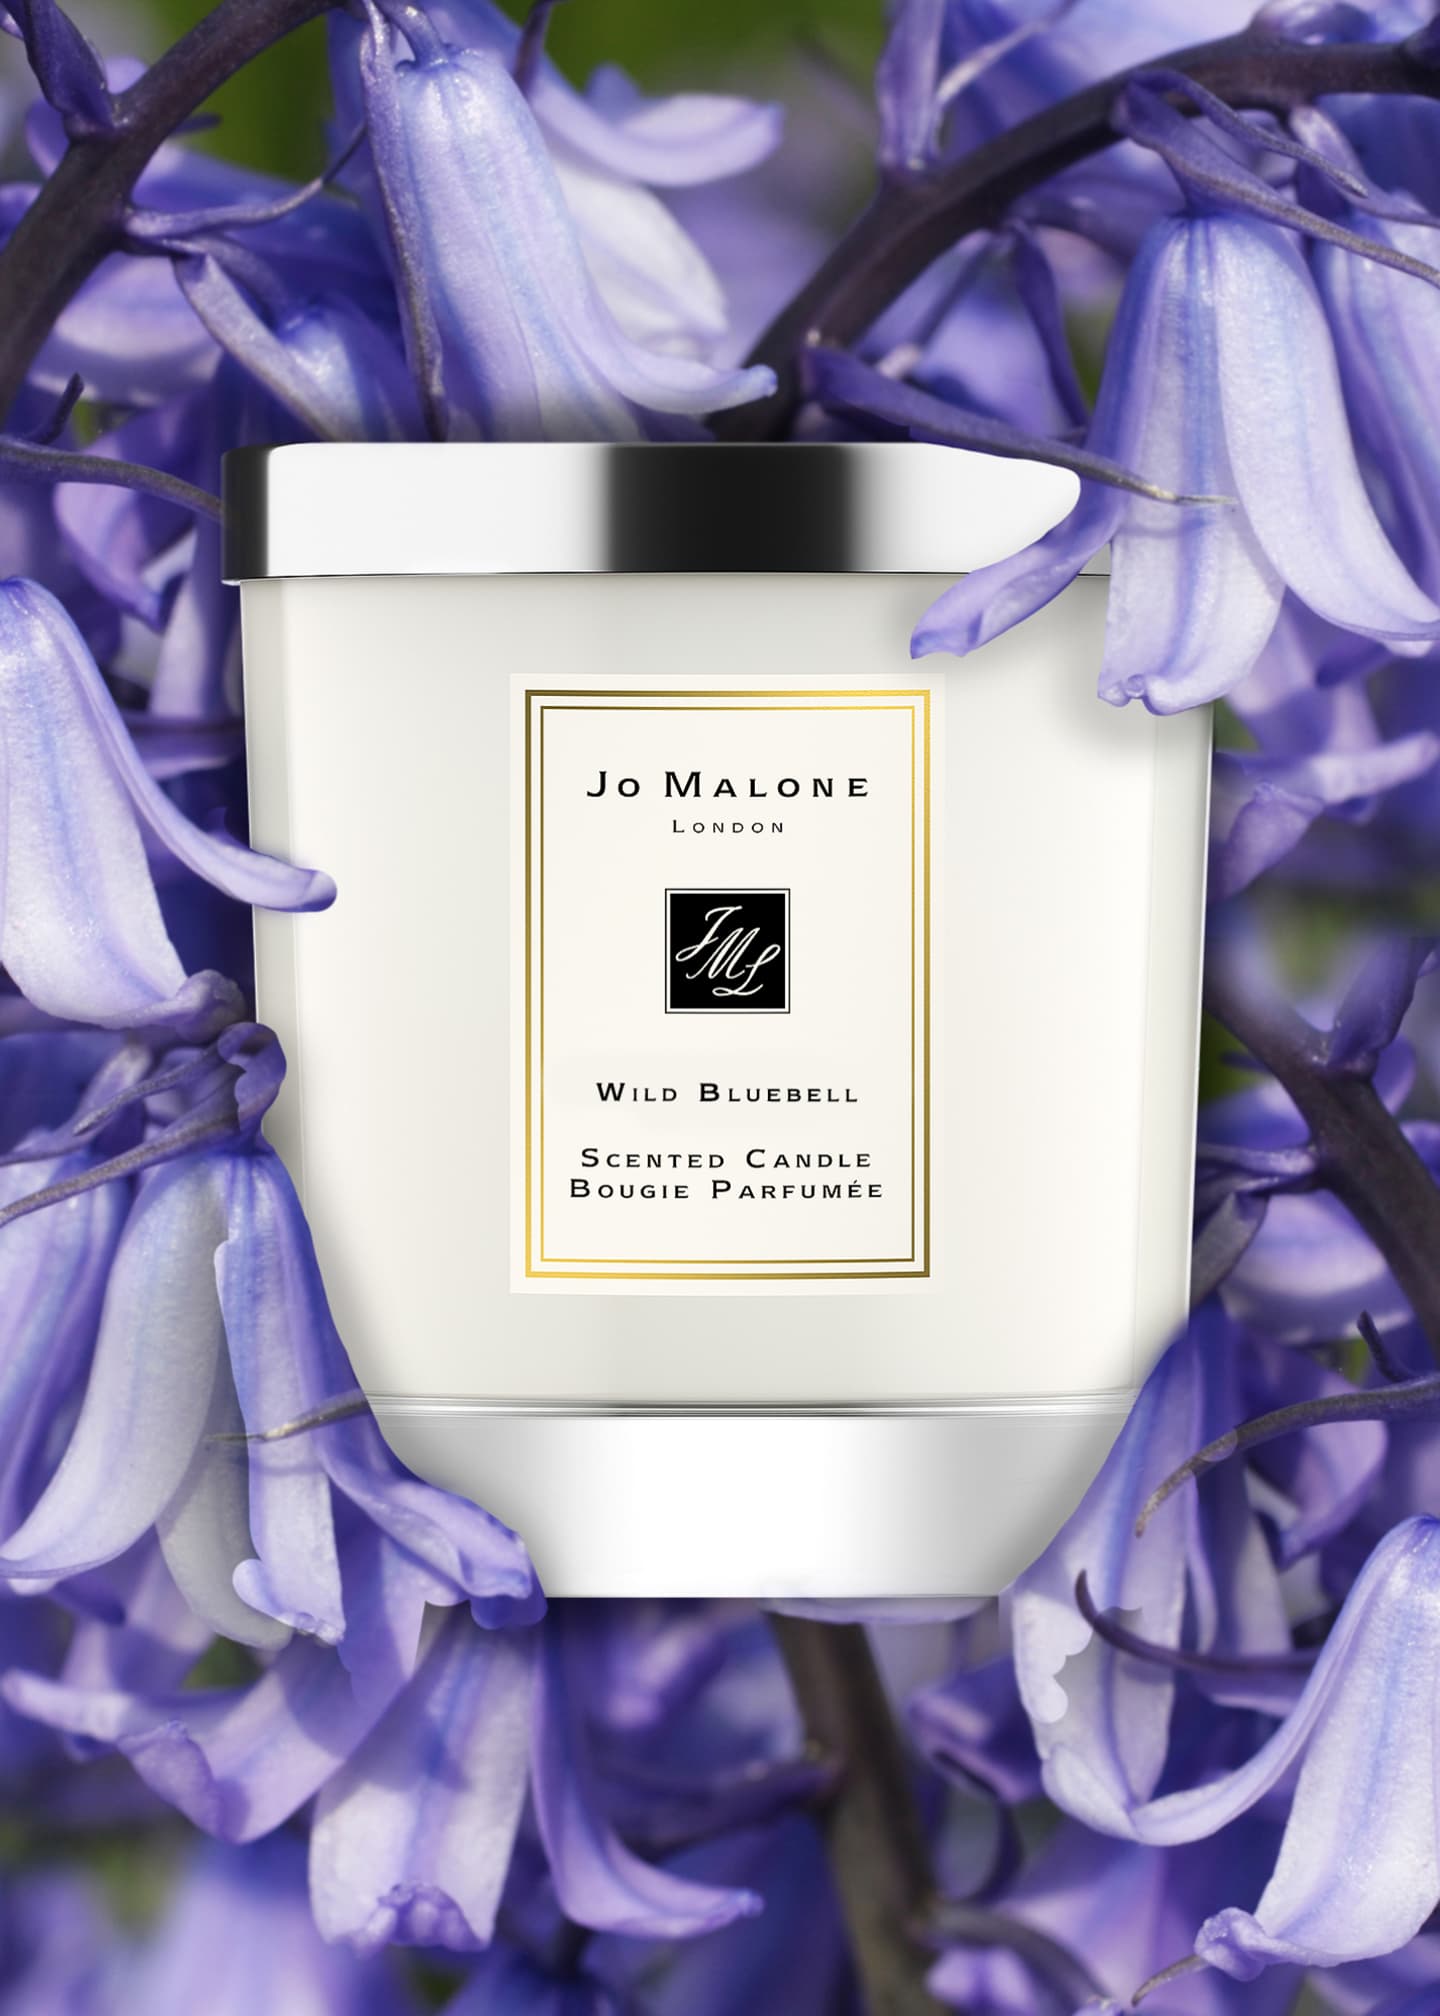 Jo Malone London Wild Bluebell Home Candle Image 4 of 4